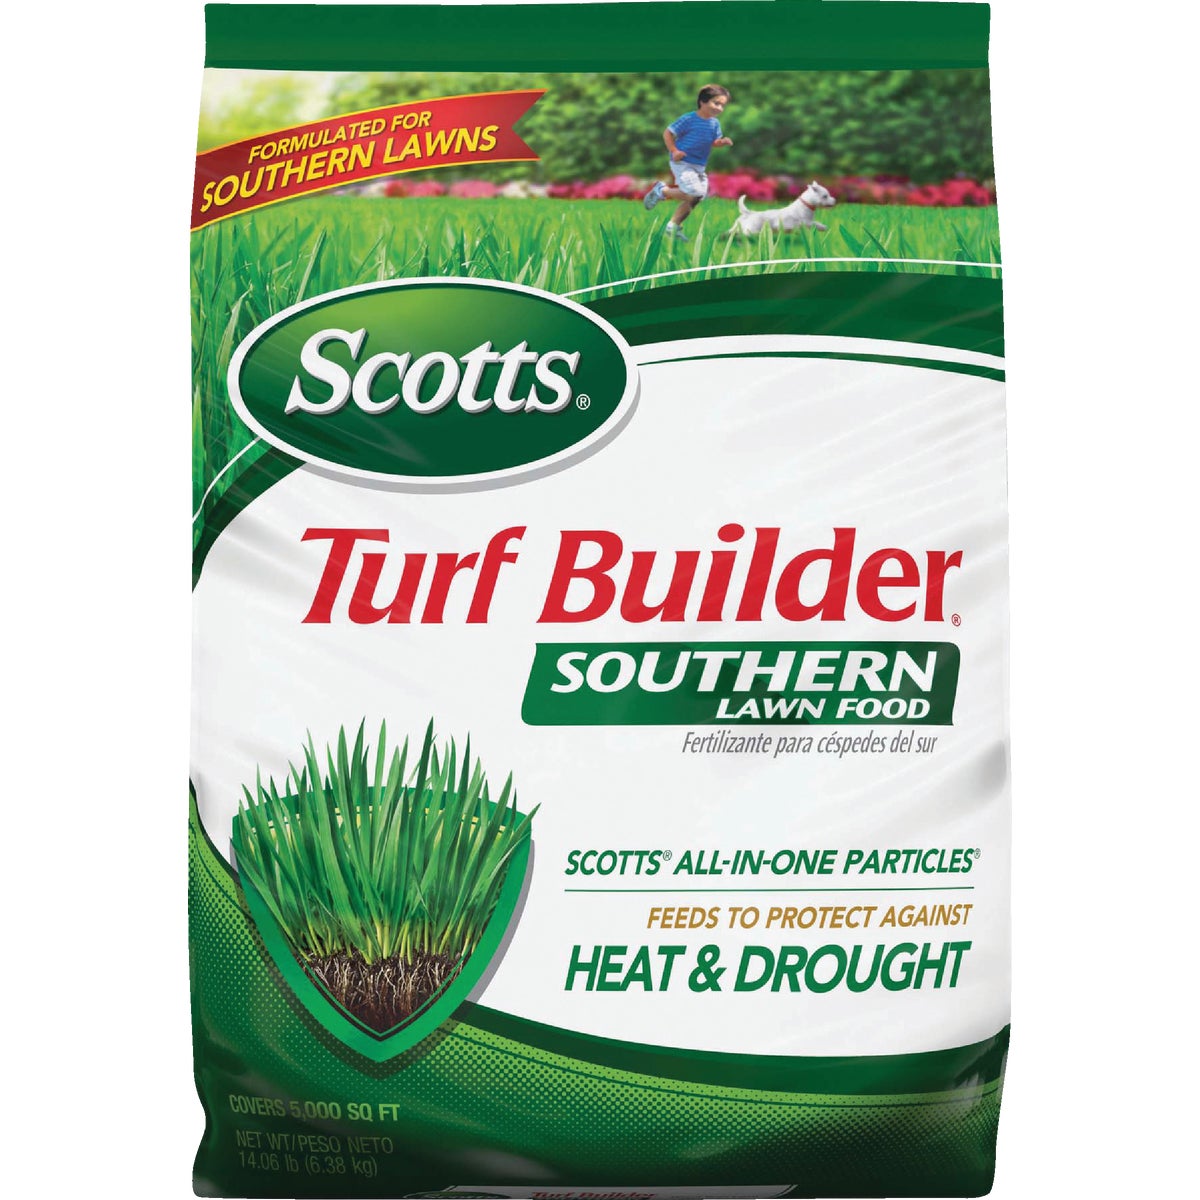 Item 720595, Scotts Turf Builder Southern Lawn Food is a fertilizer specially formulated